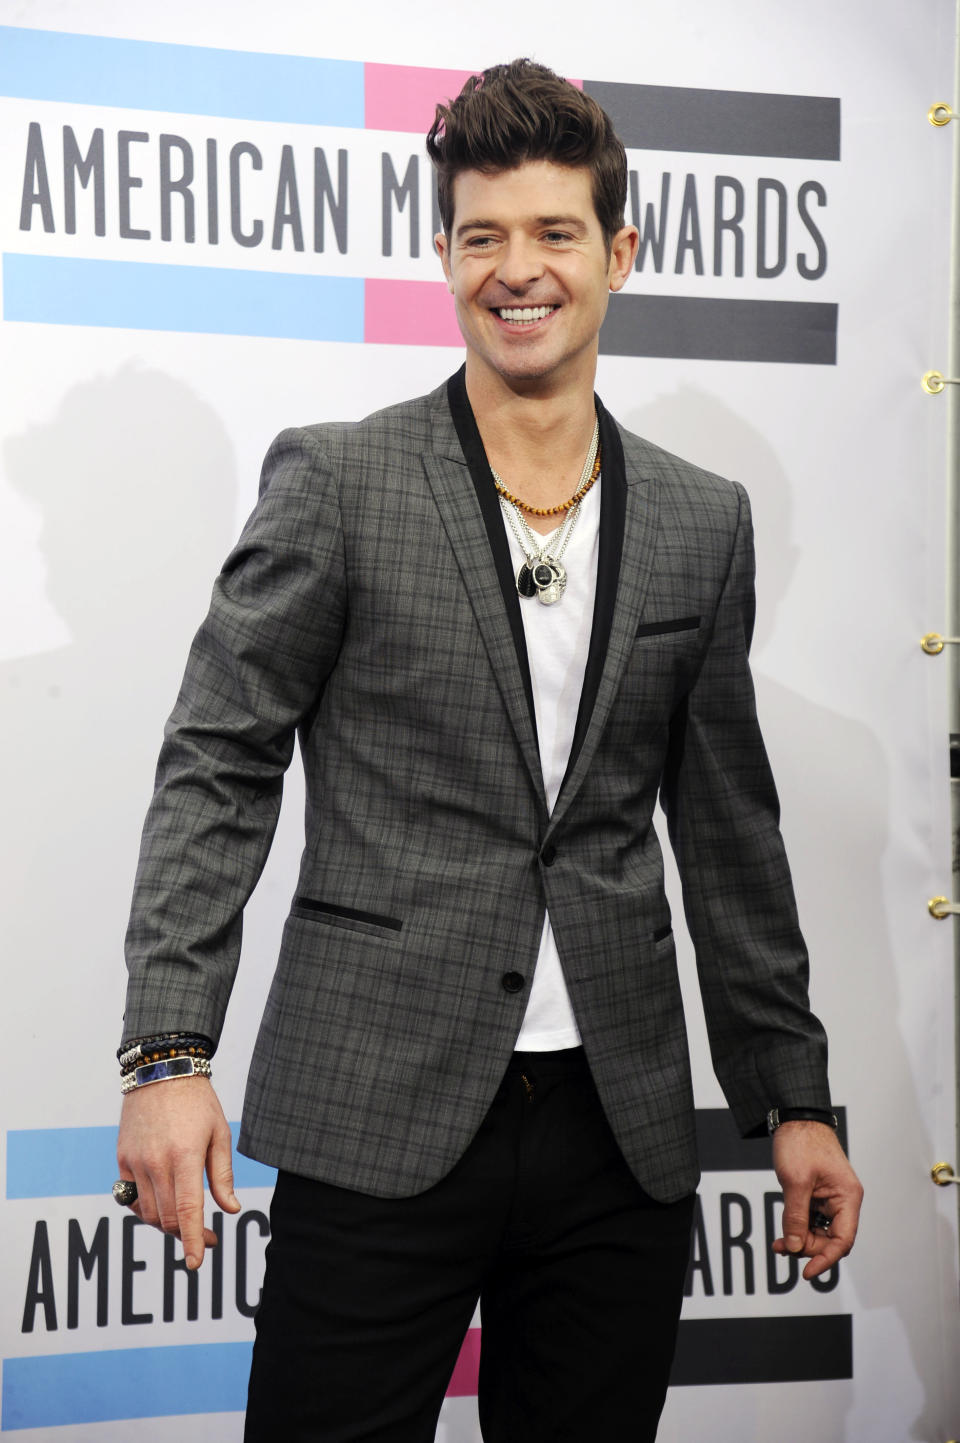 FILE - In this Sunday, Nov. 20, 2011 file photo, Robin Thicke poses backstage at the 39th Annual American Music Awards, in Los Angeles. R&B singer Robin Thicke is a mentor on the new ABC singing series “Duets.” It also features Kelly Clarkson, John Legend and Sugarland's Jennifer Nettles. (AP Photo/Chris Pizzello, File)